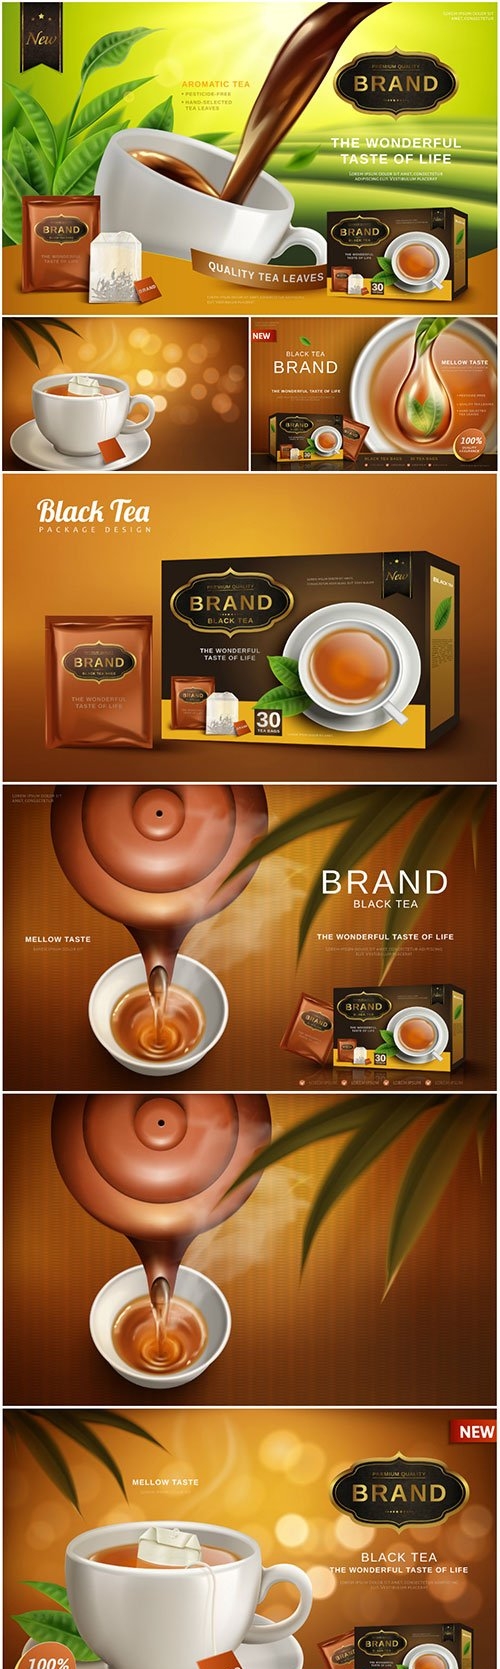 Black tea ad, with tea leaves and package box